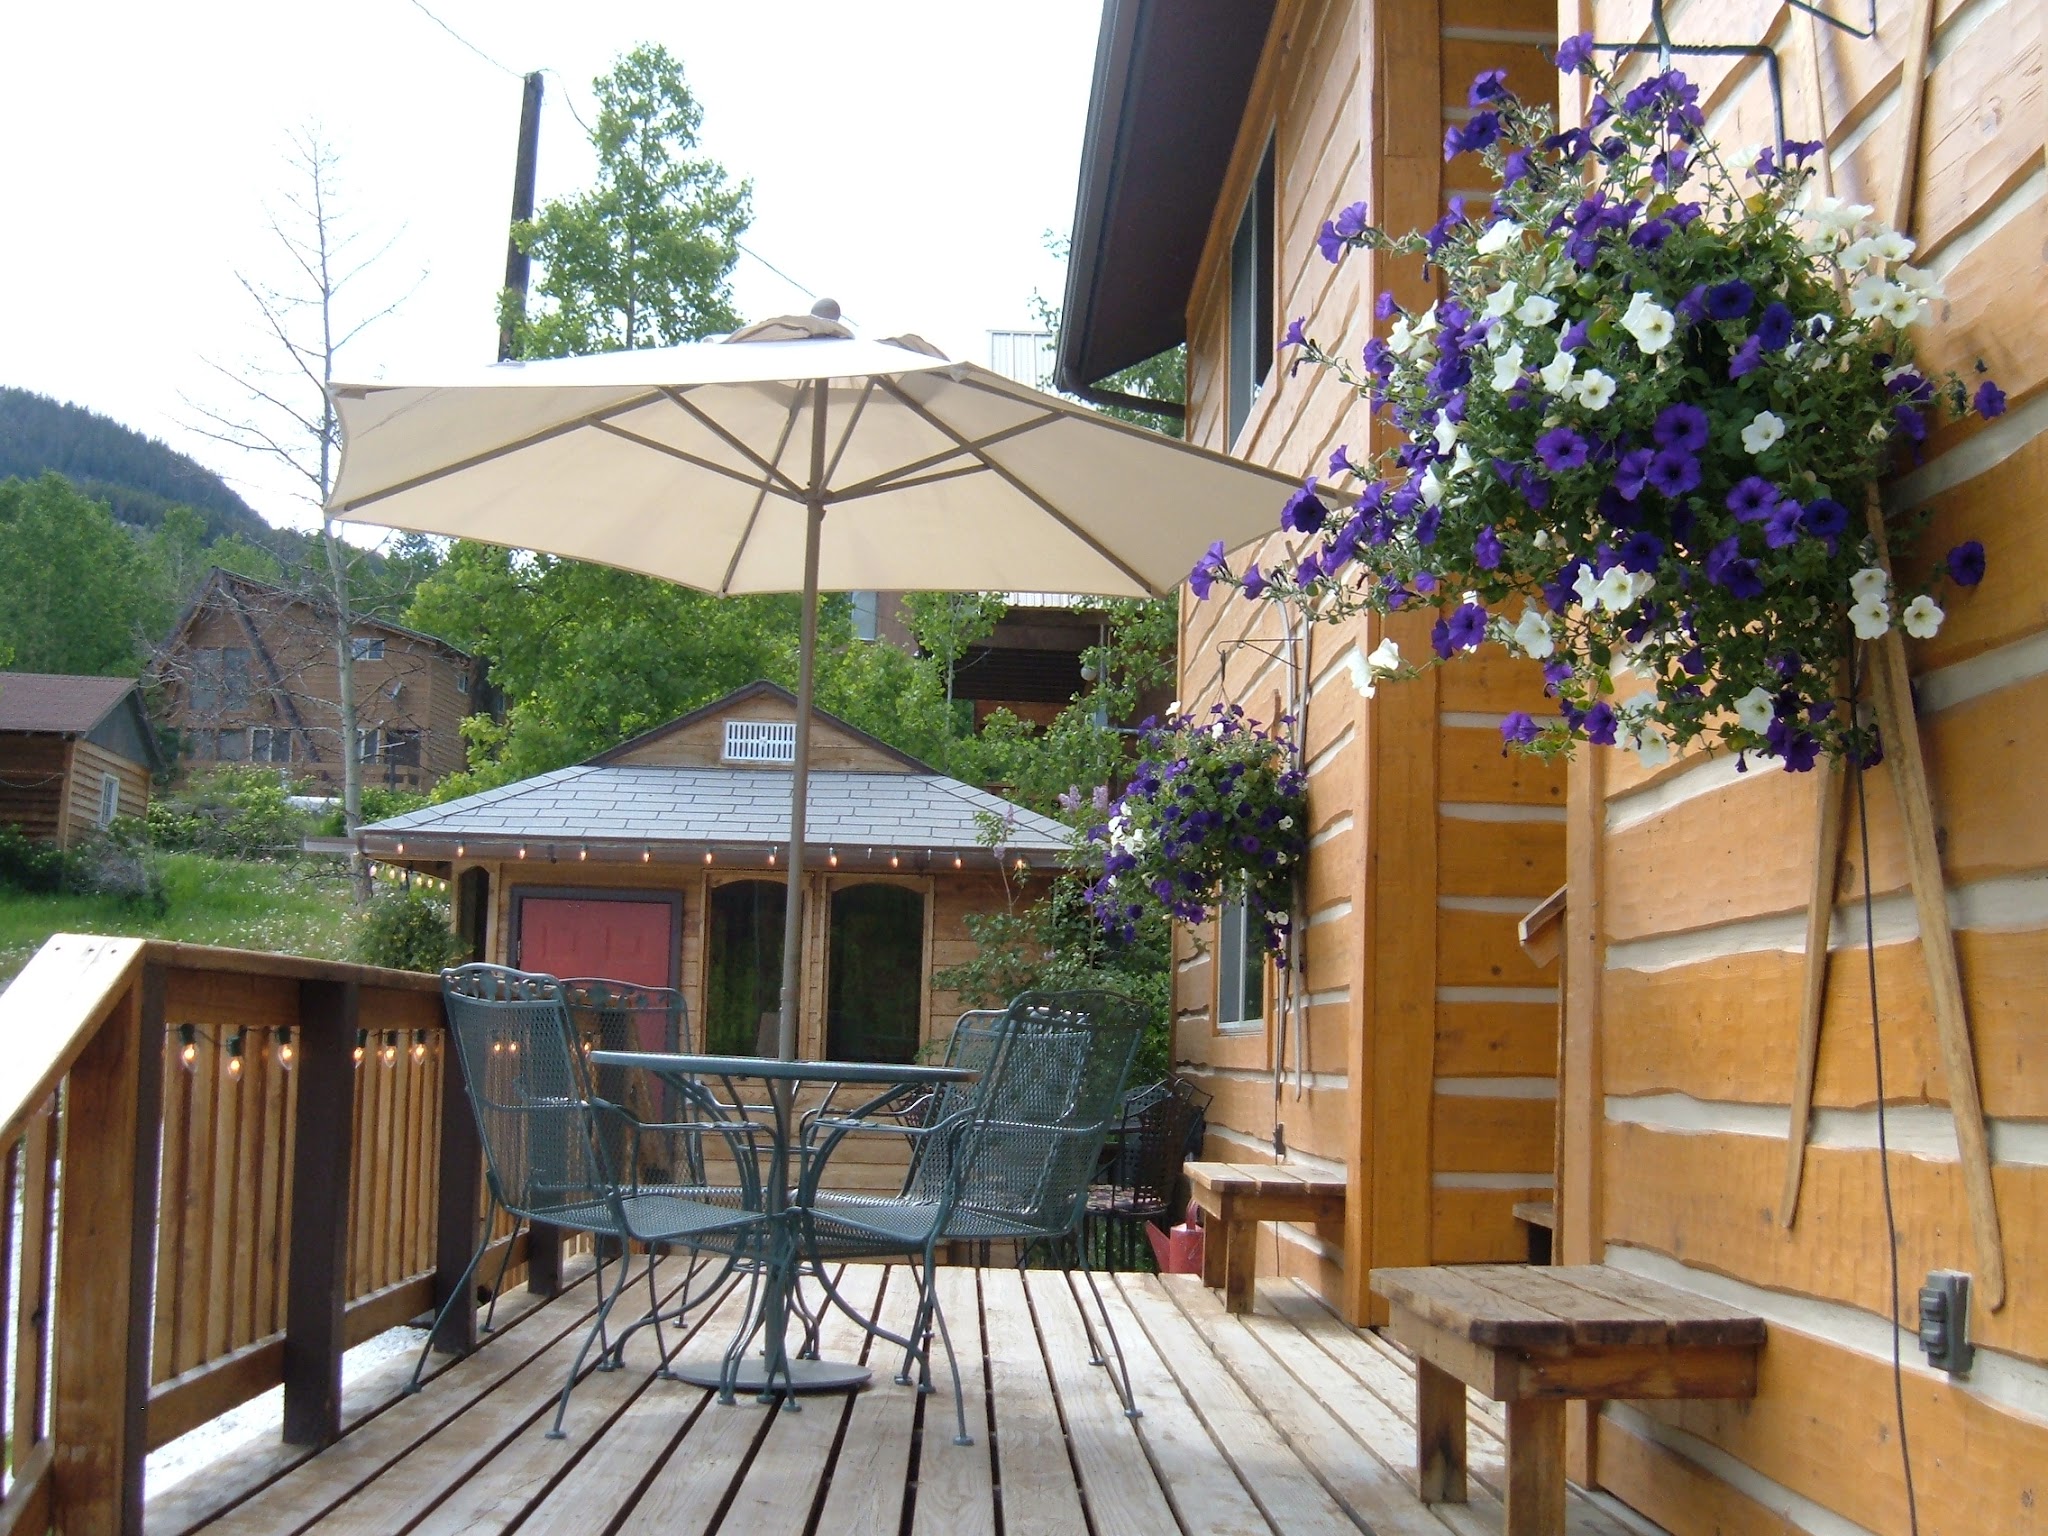 Wooded deck with two large hanging pots of purple flowers; both attached to the log sided condos with antique skis behind the the hanging flower pots.